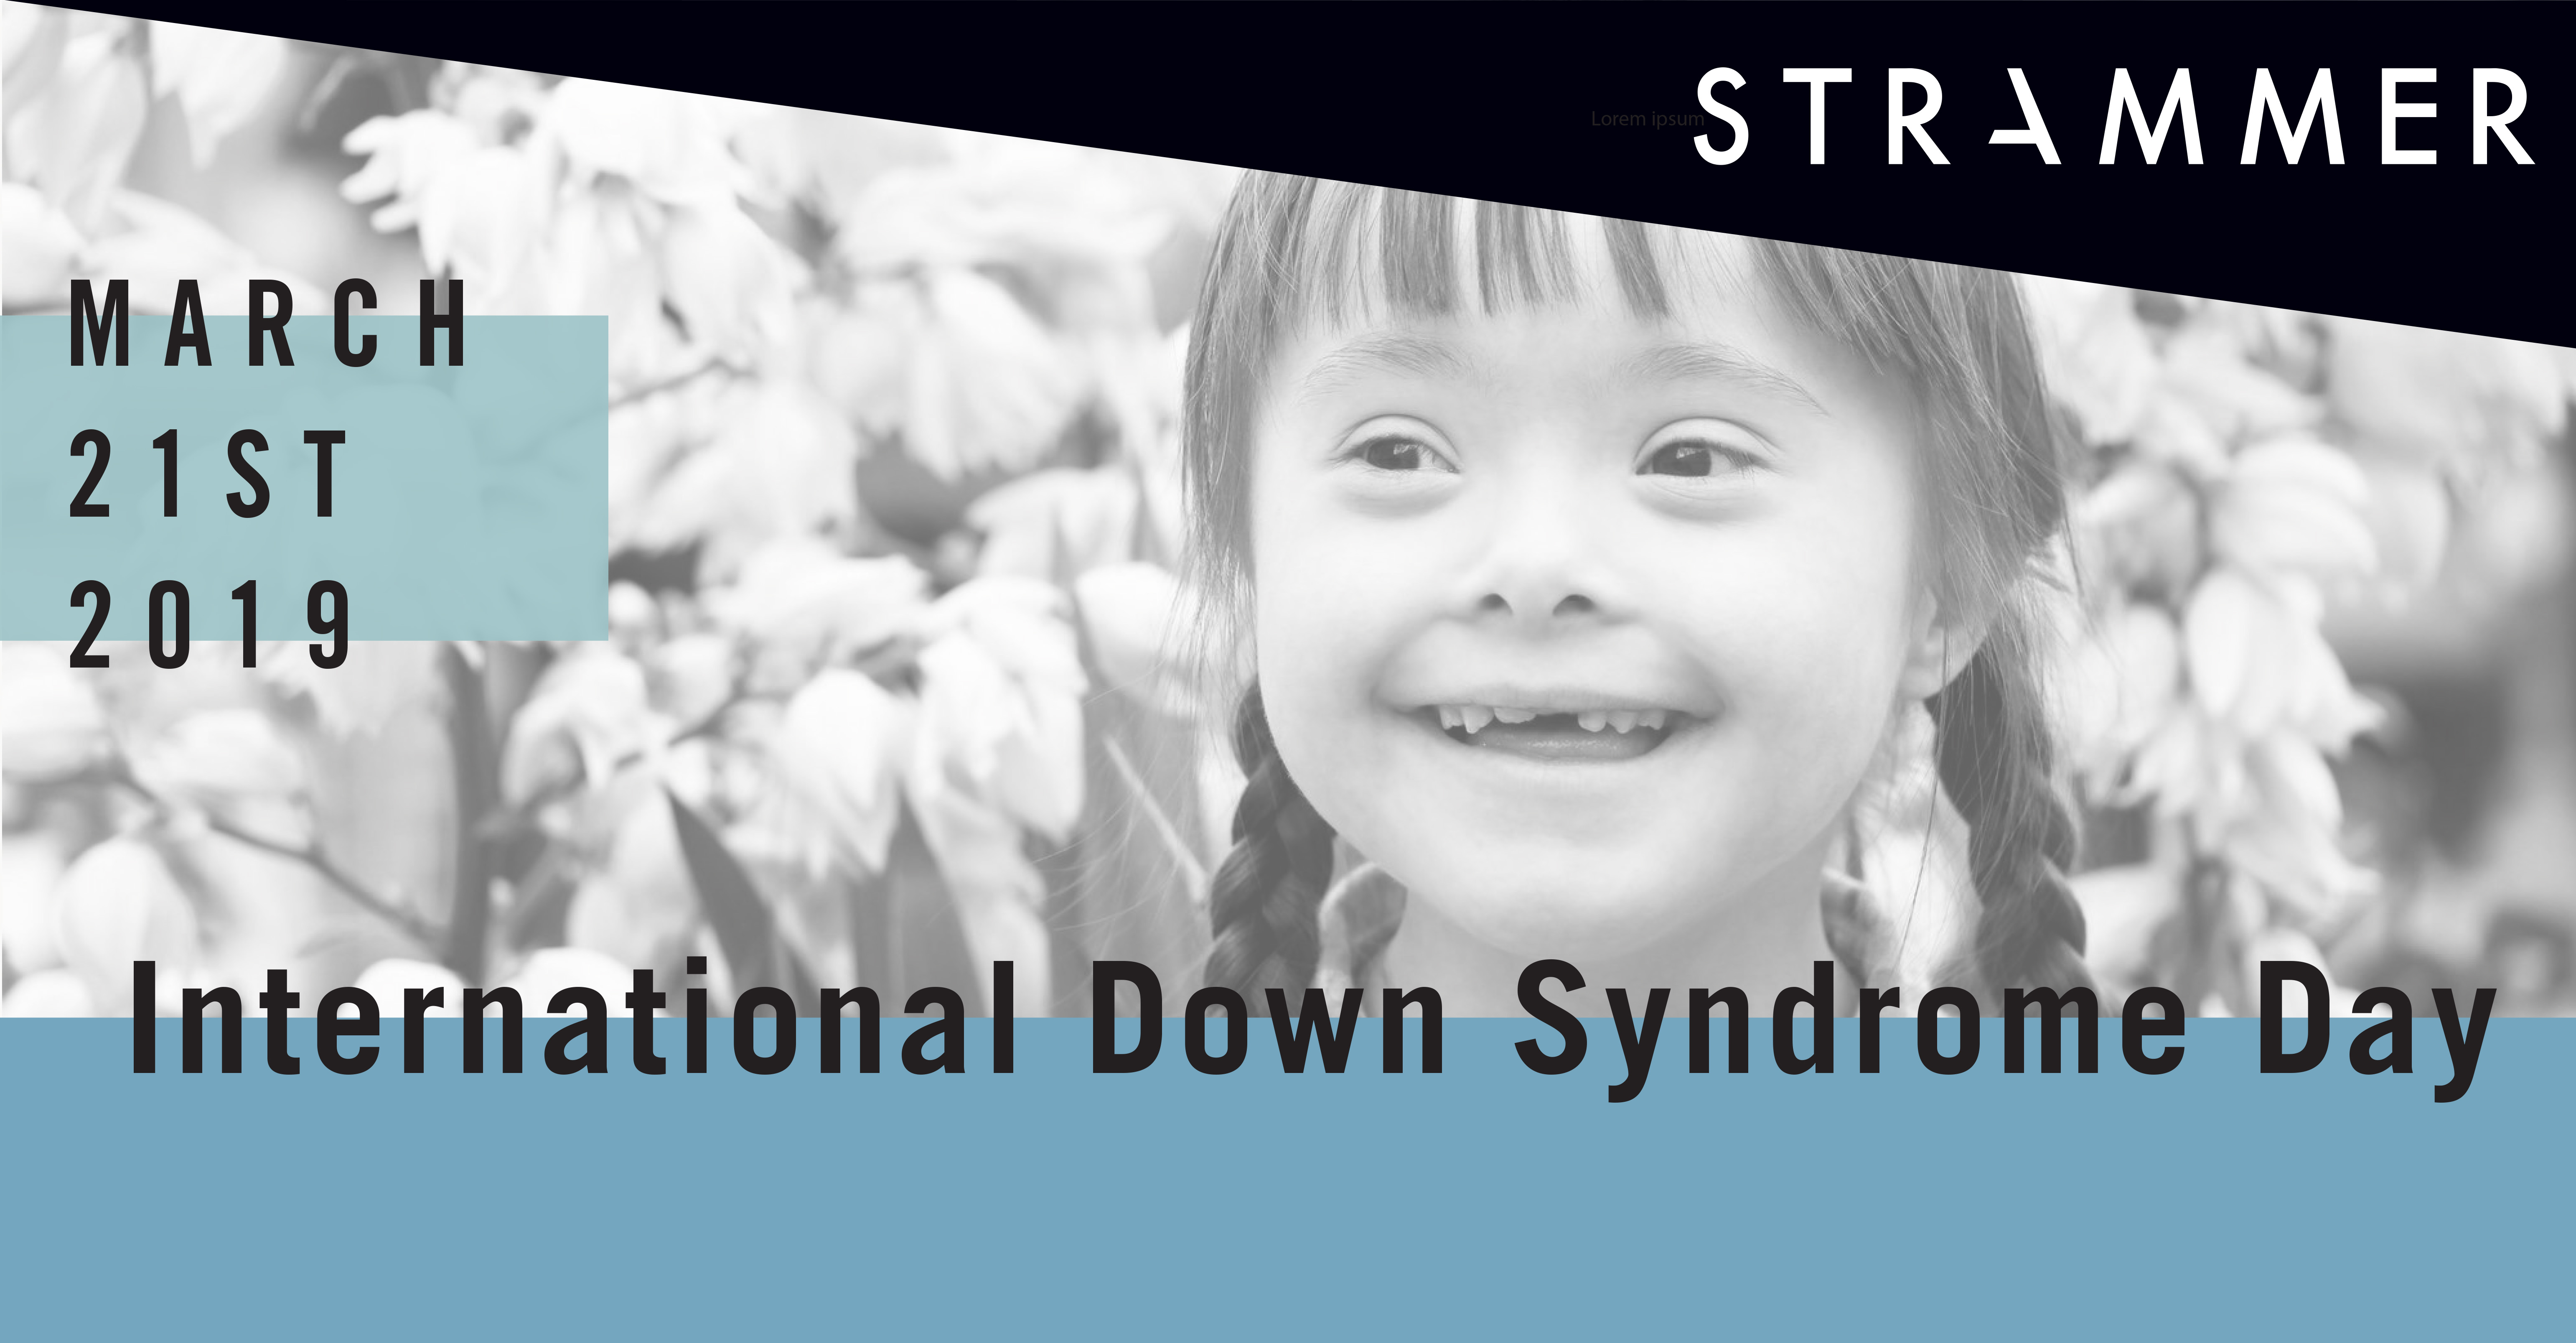 International Down Syndrome Day